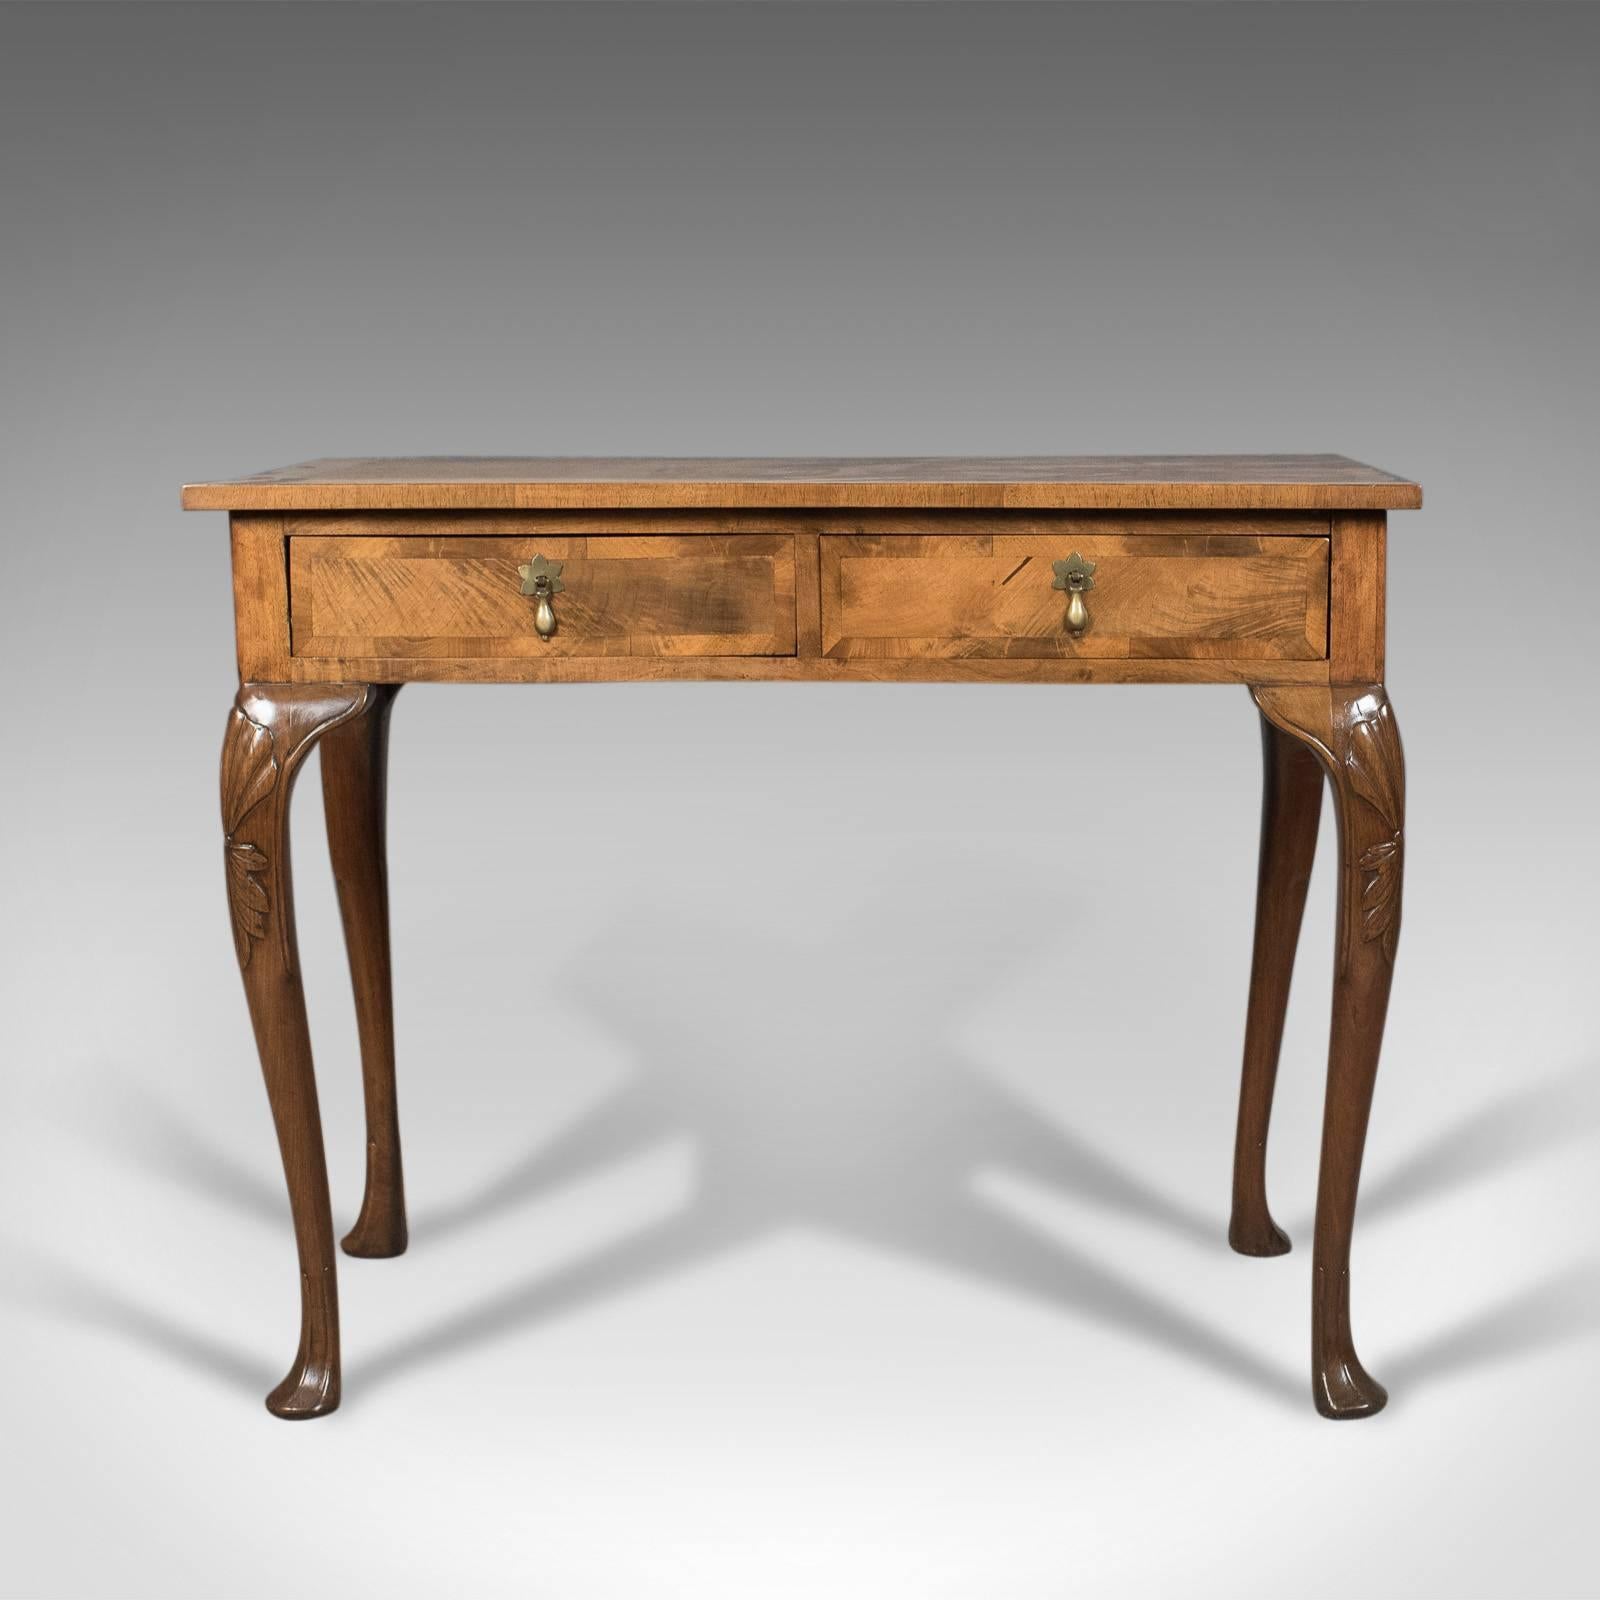 This is an Edwardian antique side table with drawers in English walnut dating to circa 1910.

Desirable light colour to the English walnut
Grain interest notably in the crossbanding to the top and drawer fronts
Well proportioned and of quality